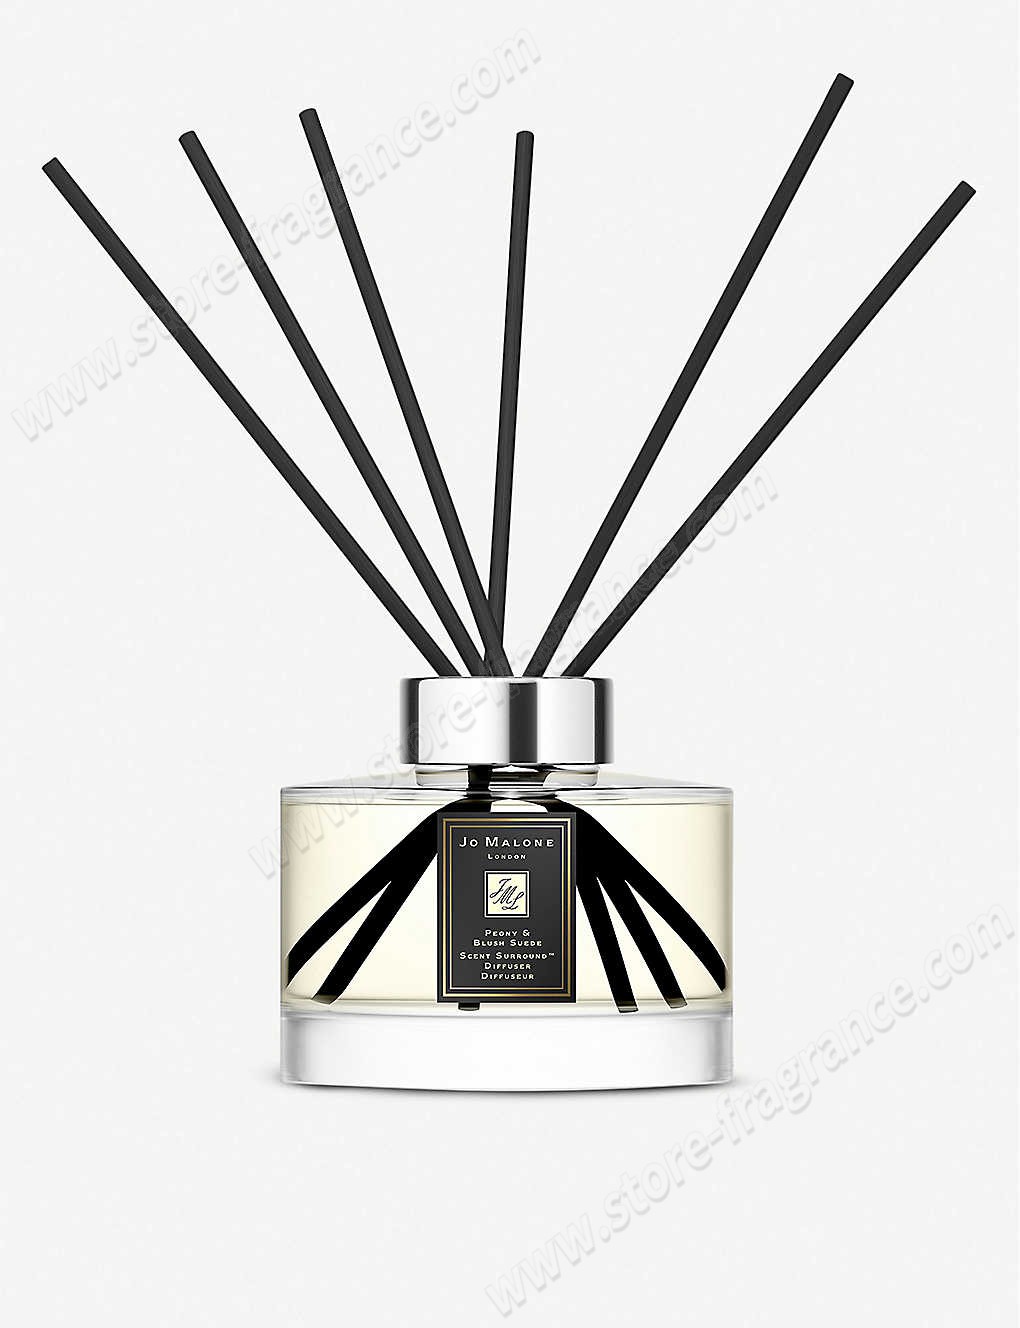 JO MALONE LONDON/Peony & Blush Suede Scent Surround™ Diffuser 165ml Limit Offer - -0